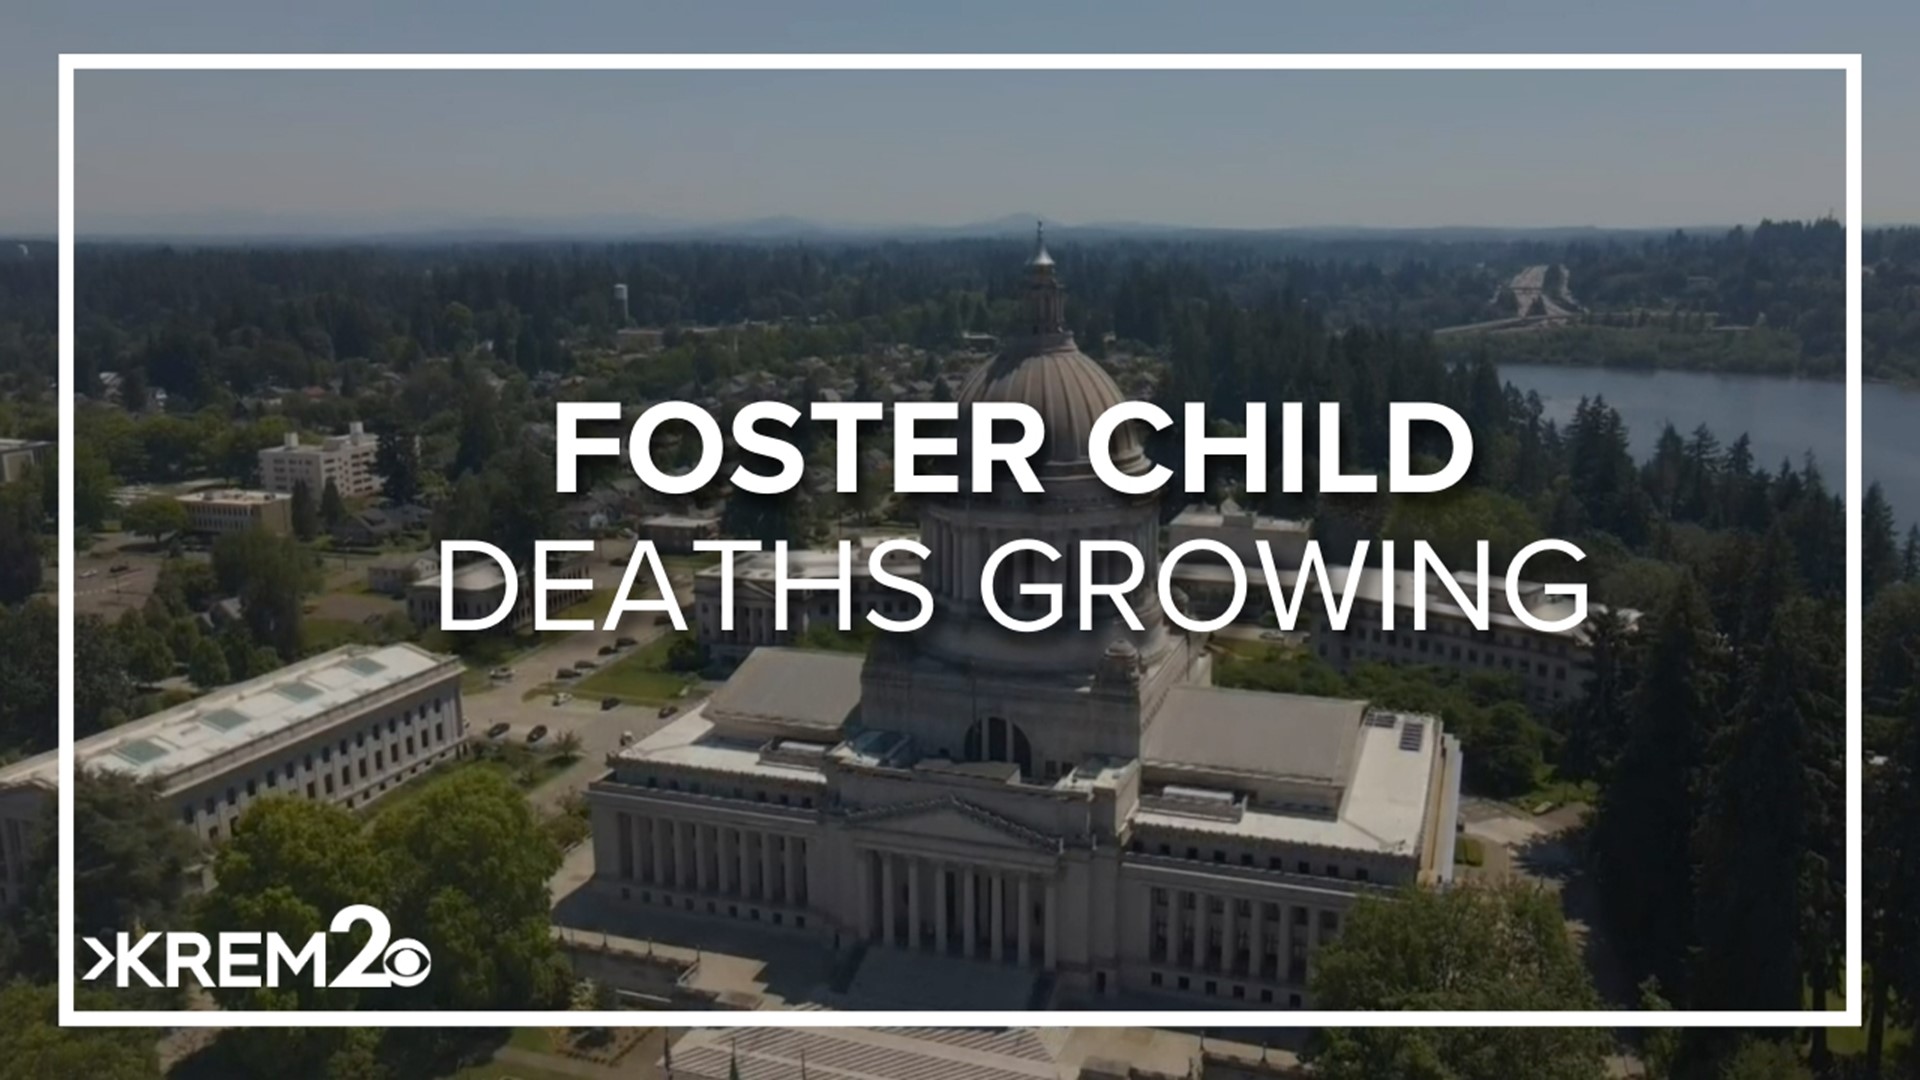 The 36-page report shows that in 2022, 39 children under state supervision died from abuse or neglect.